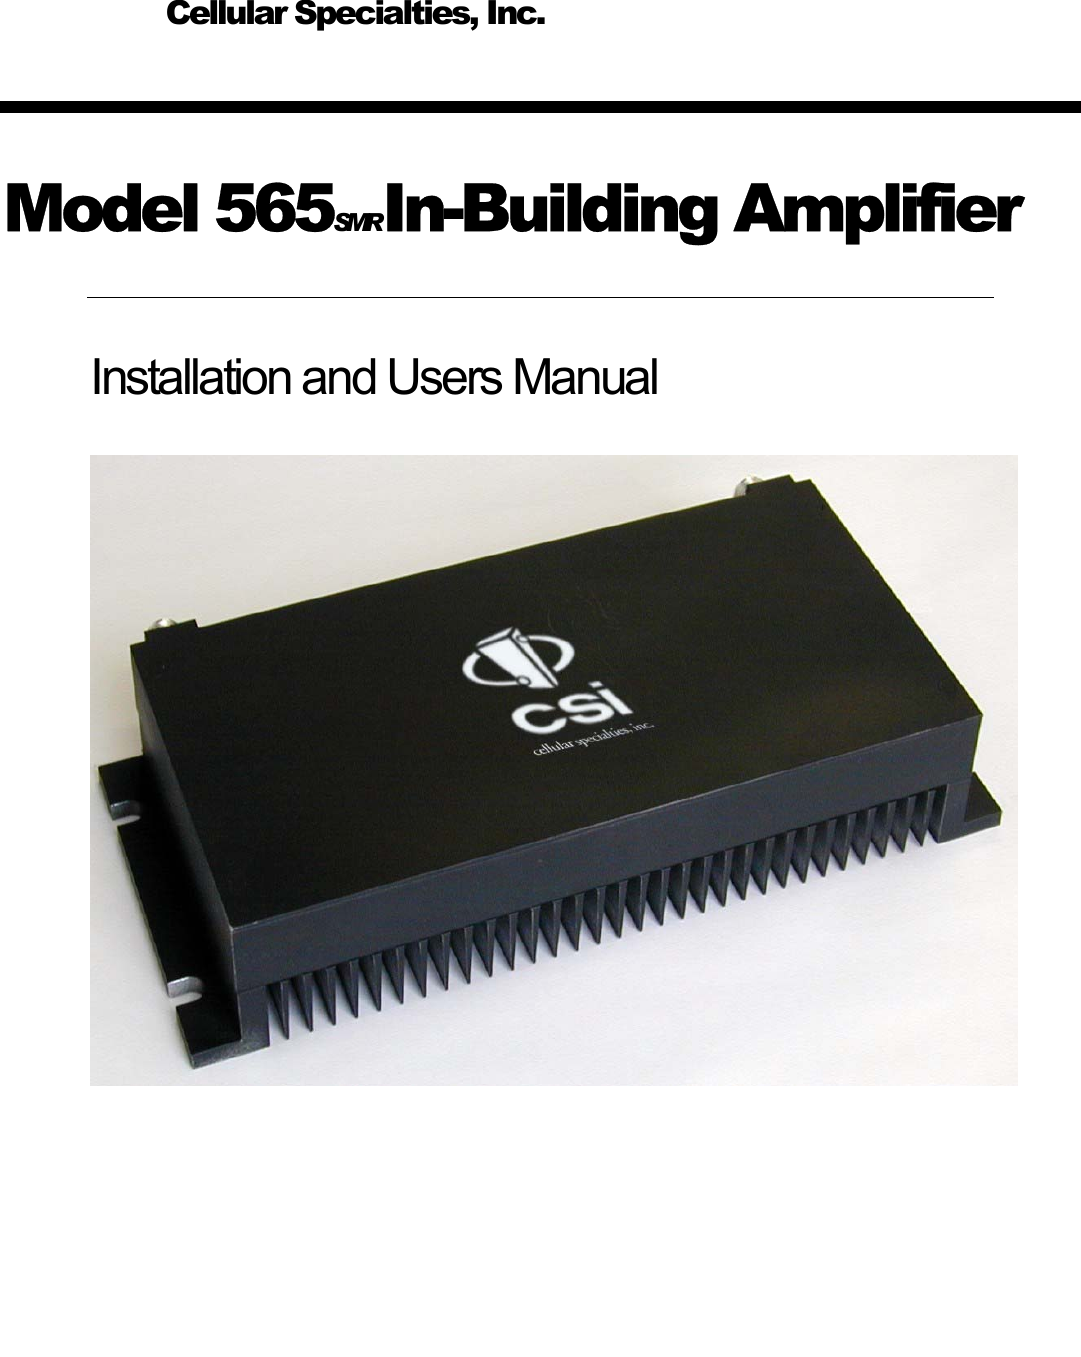   Cellular Specialties, Inc.  Model 565SMR In-Building Amplifier Installation and Users Manual       